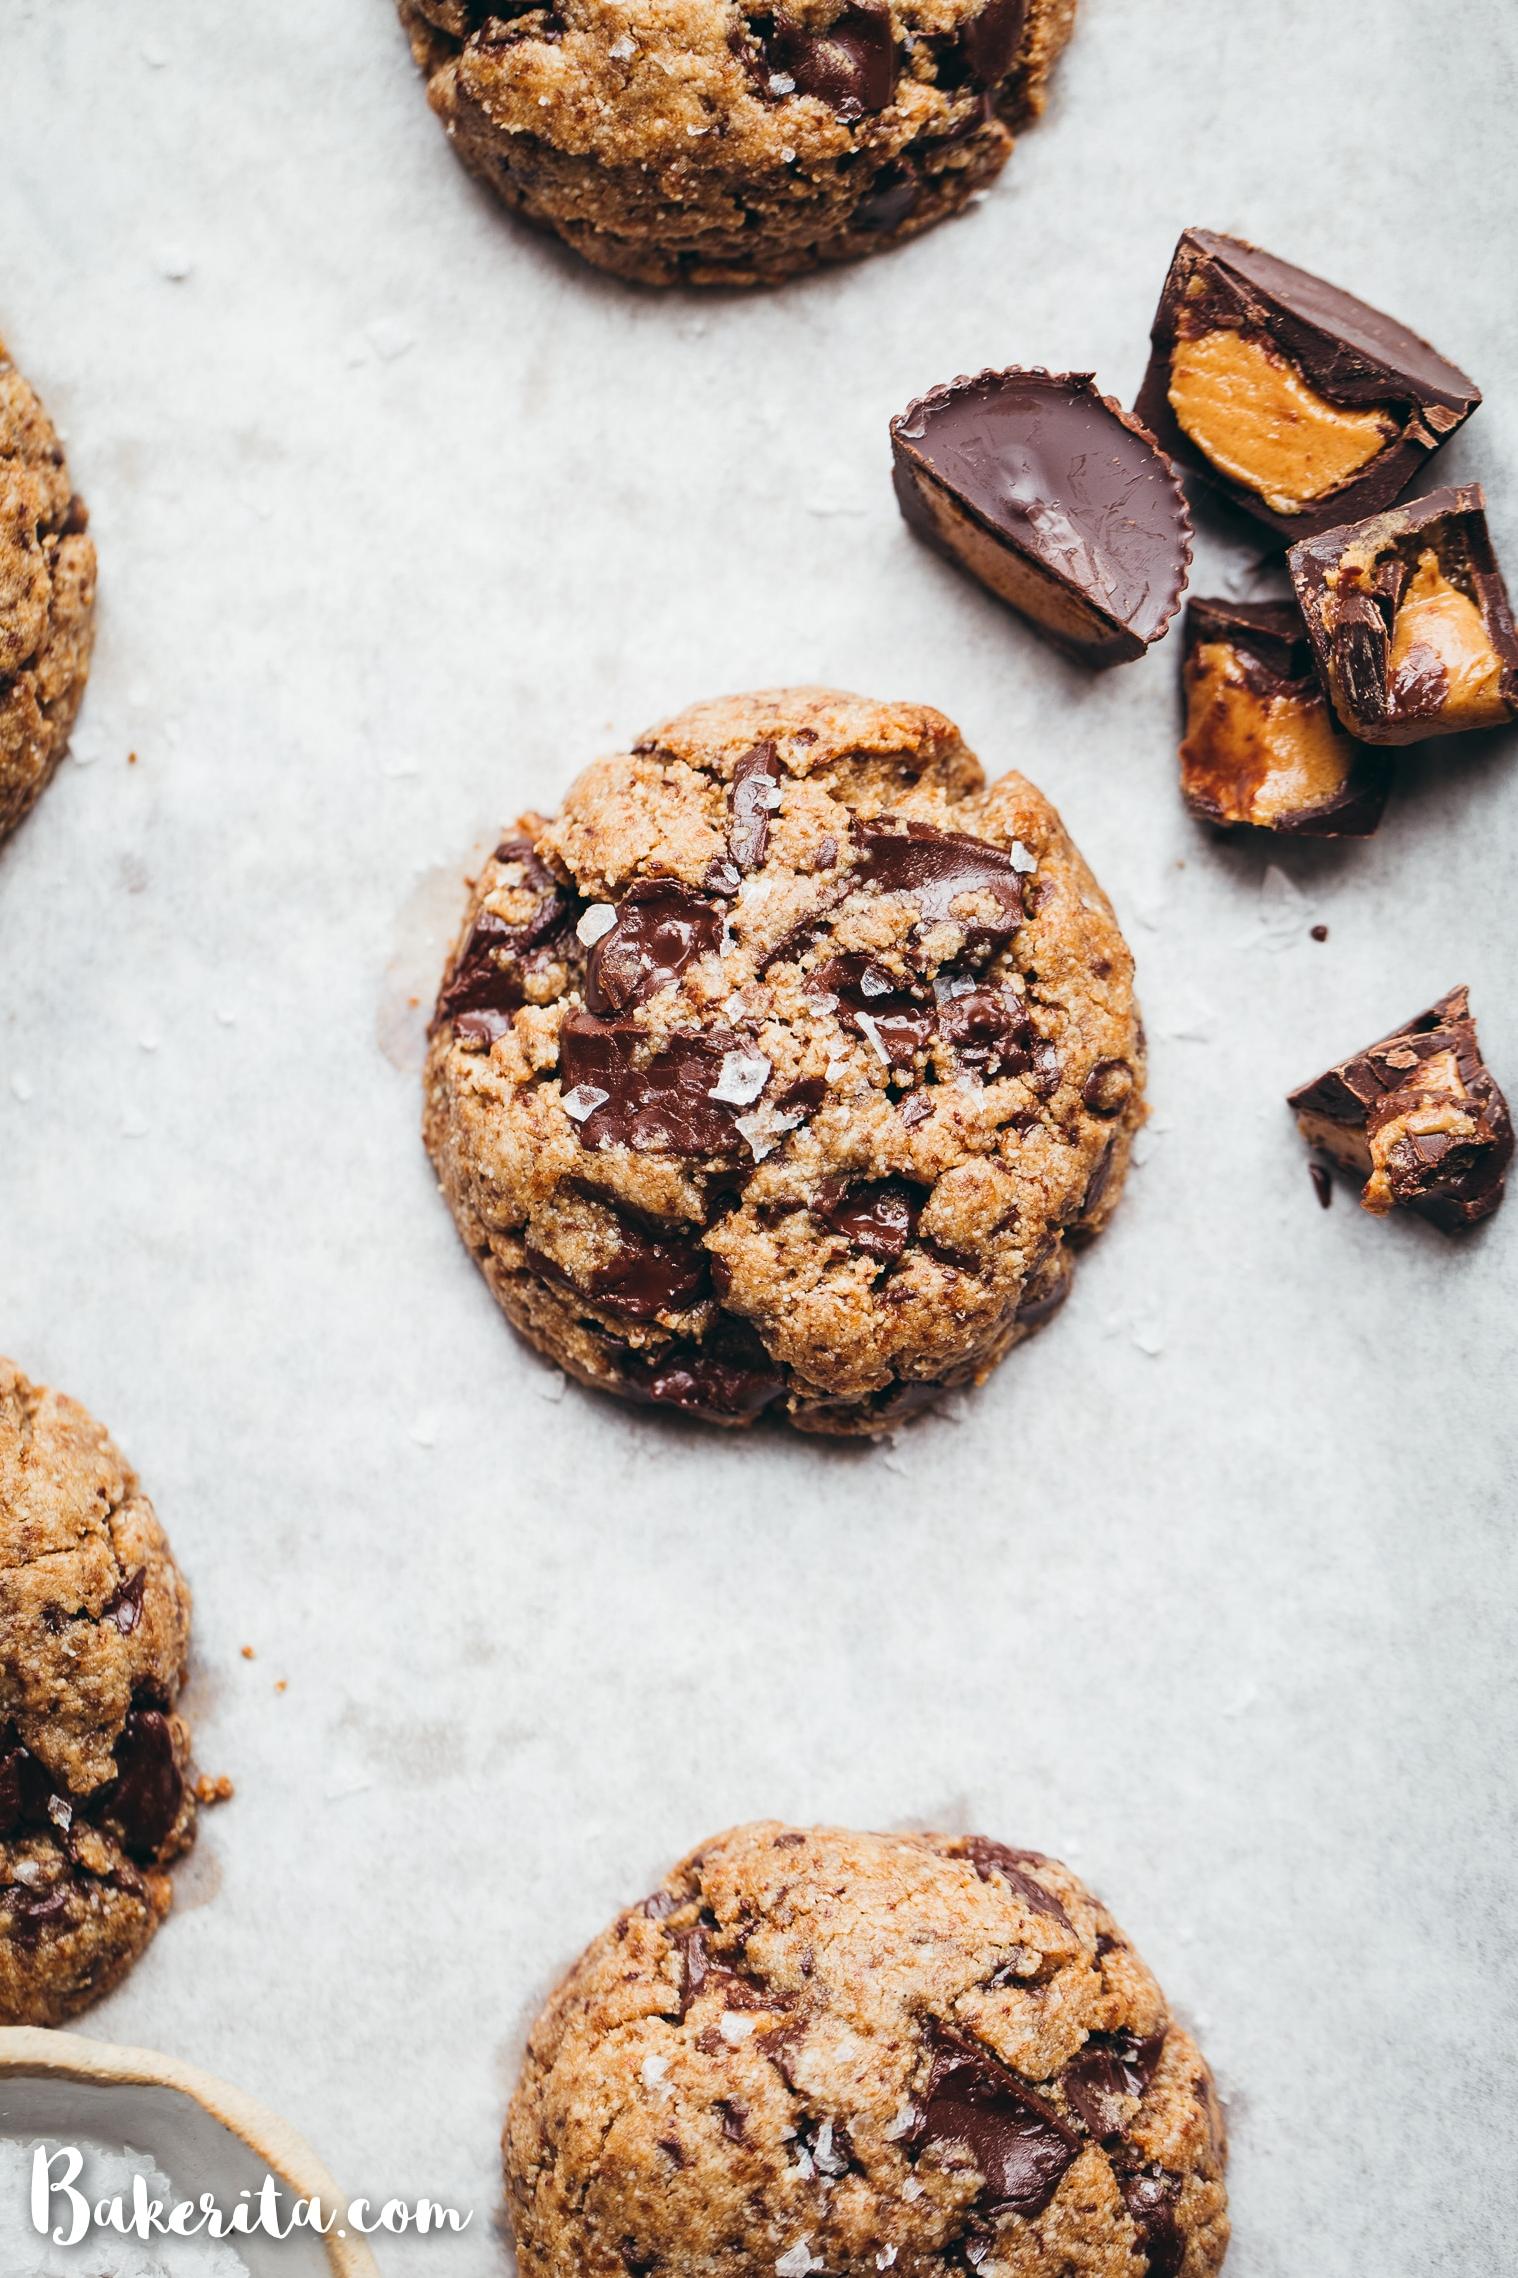  Delicious cookies without the gluten? Sign me up!